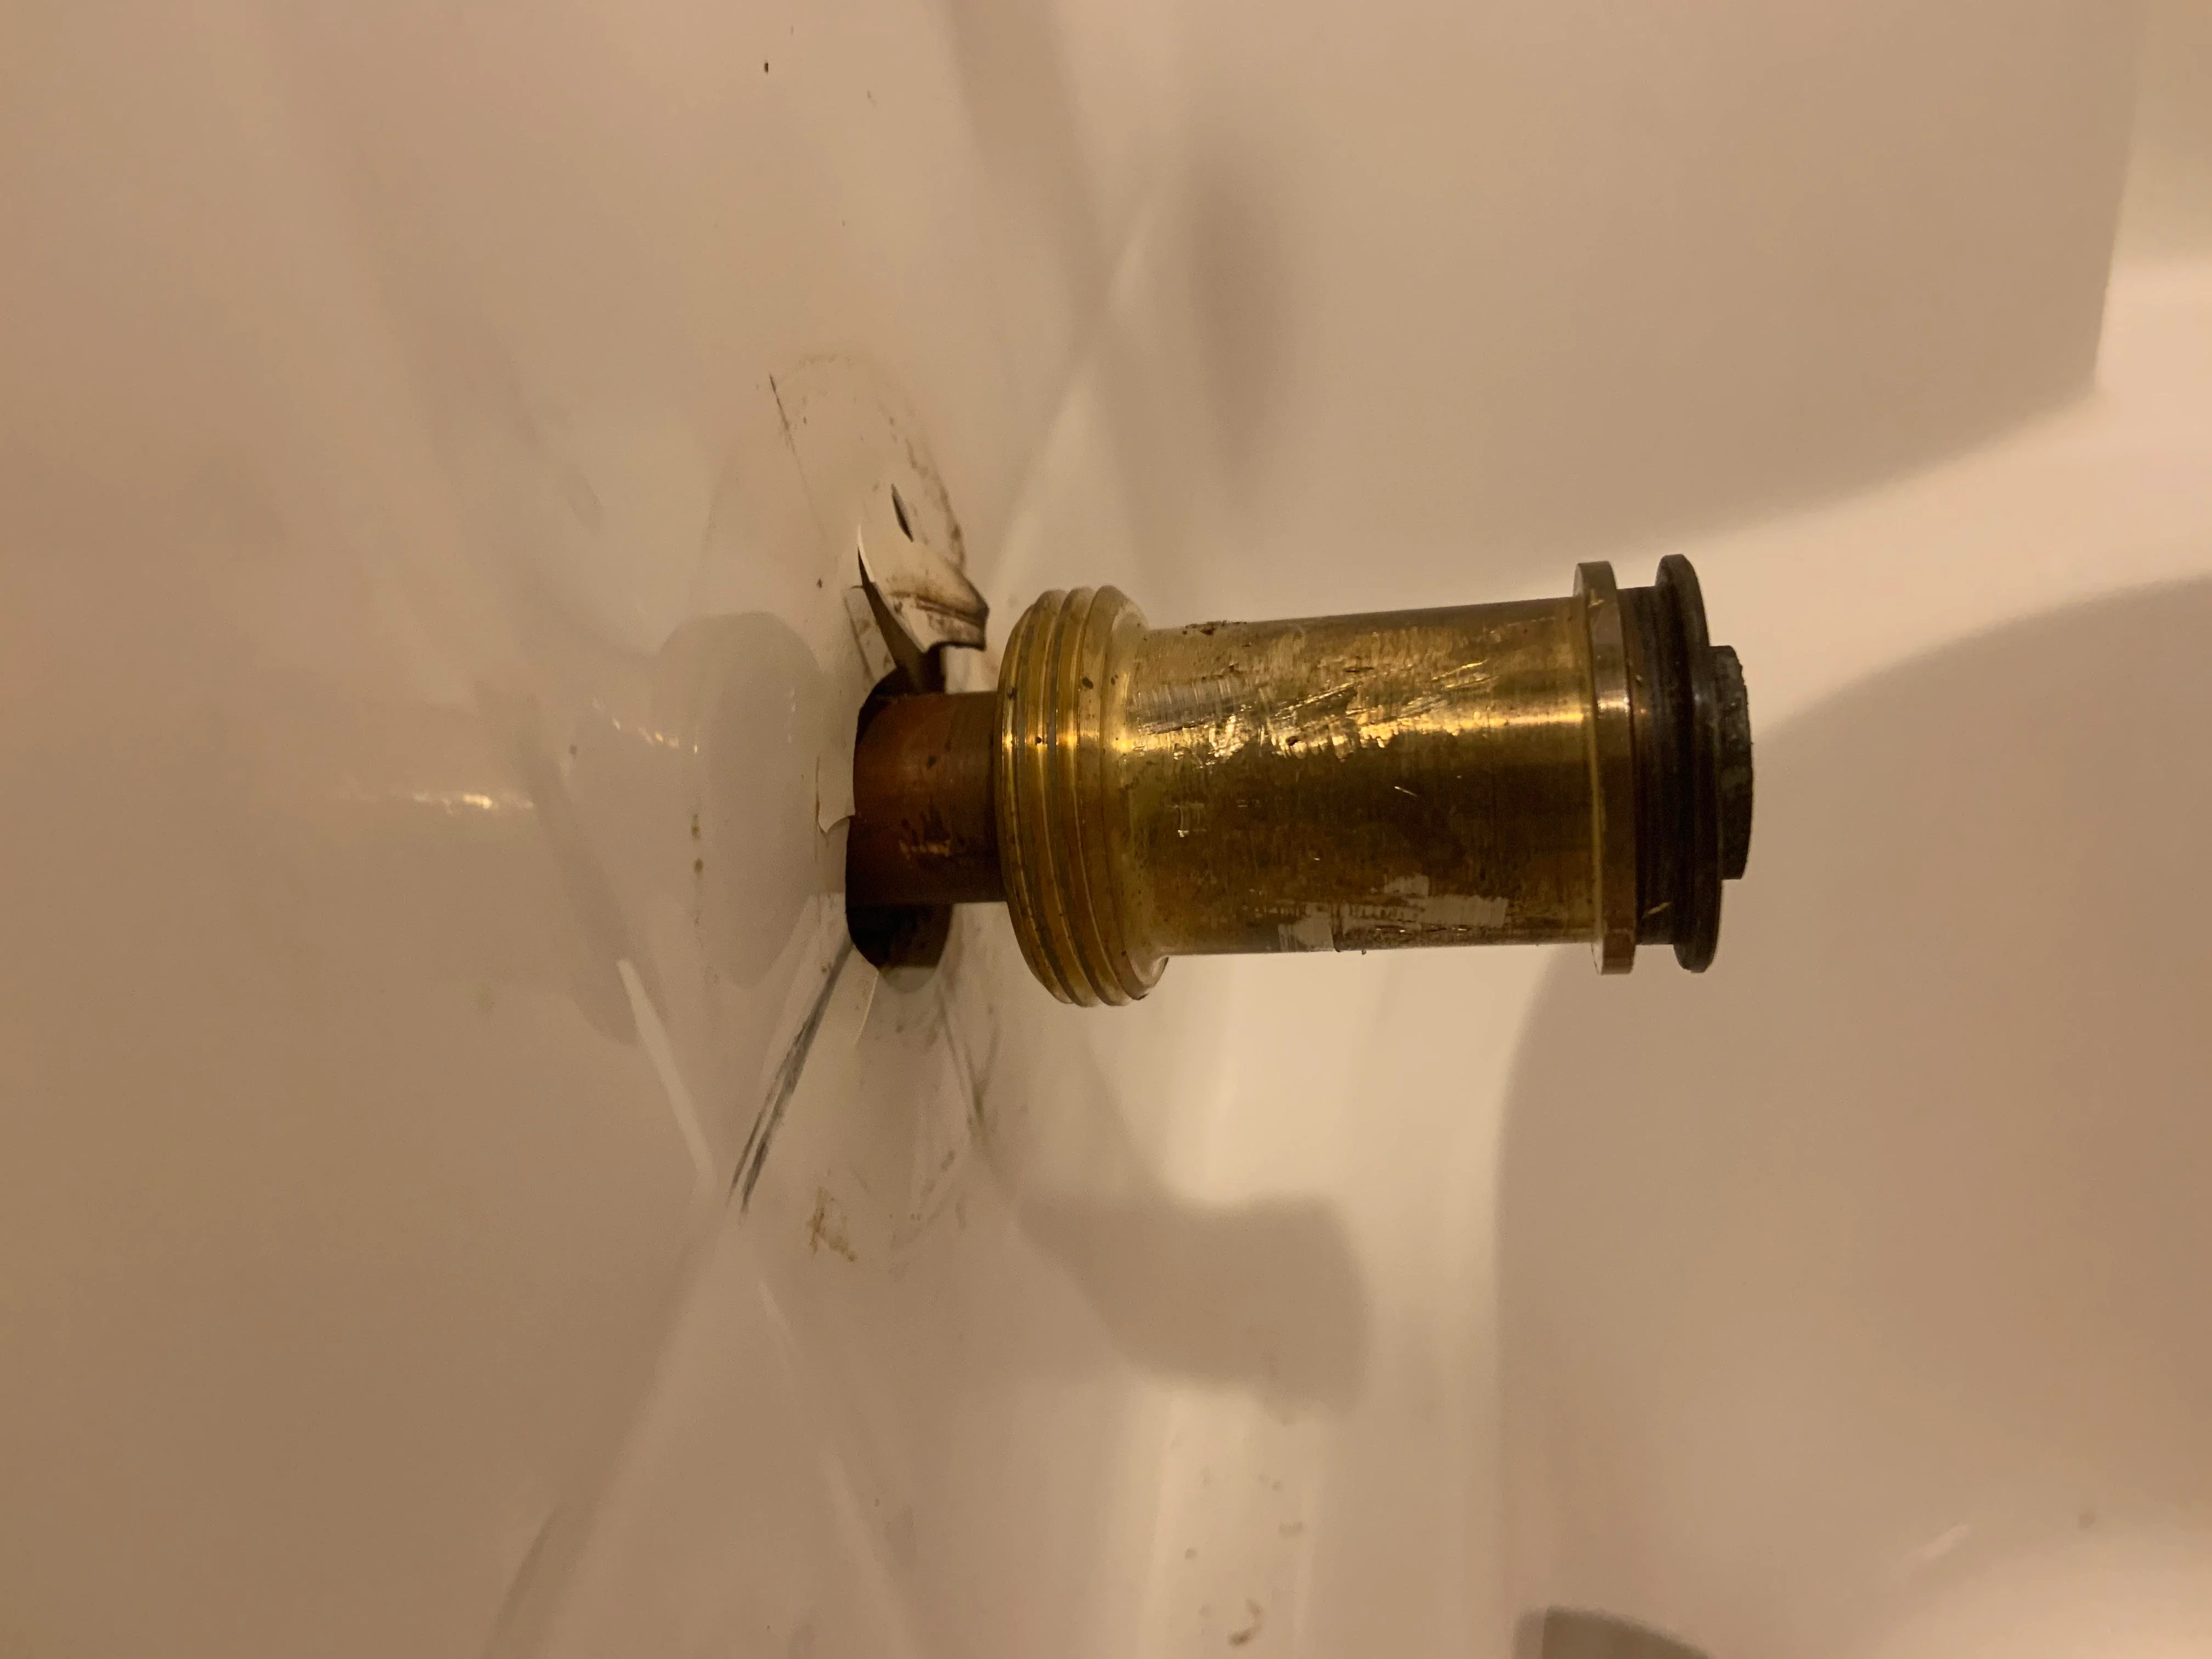 How To Remove Delta Tub Spout Adapter